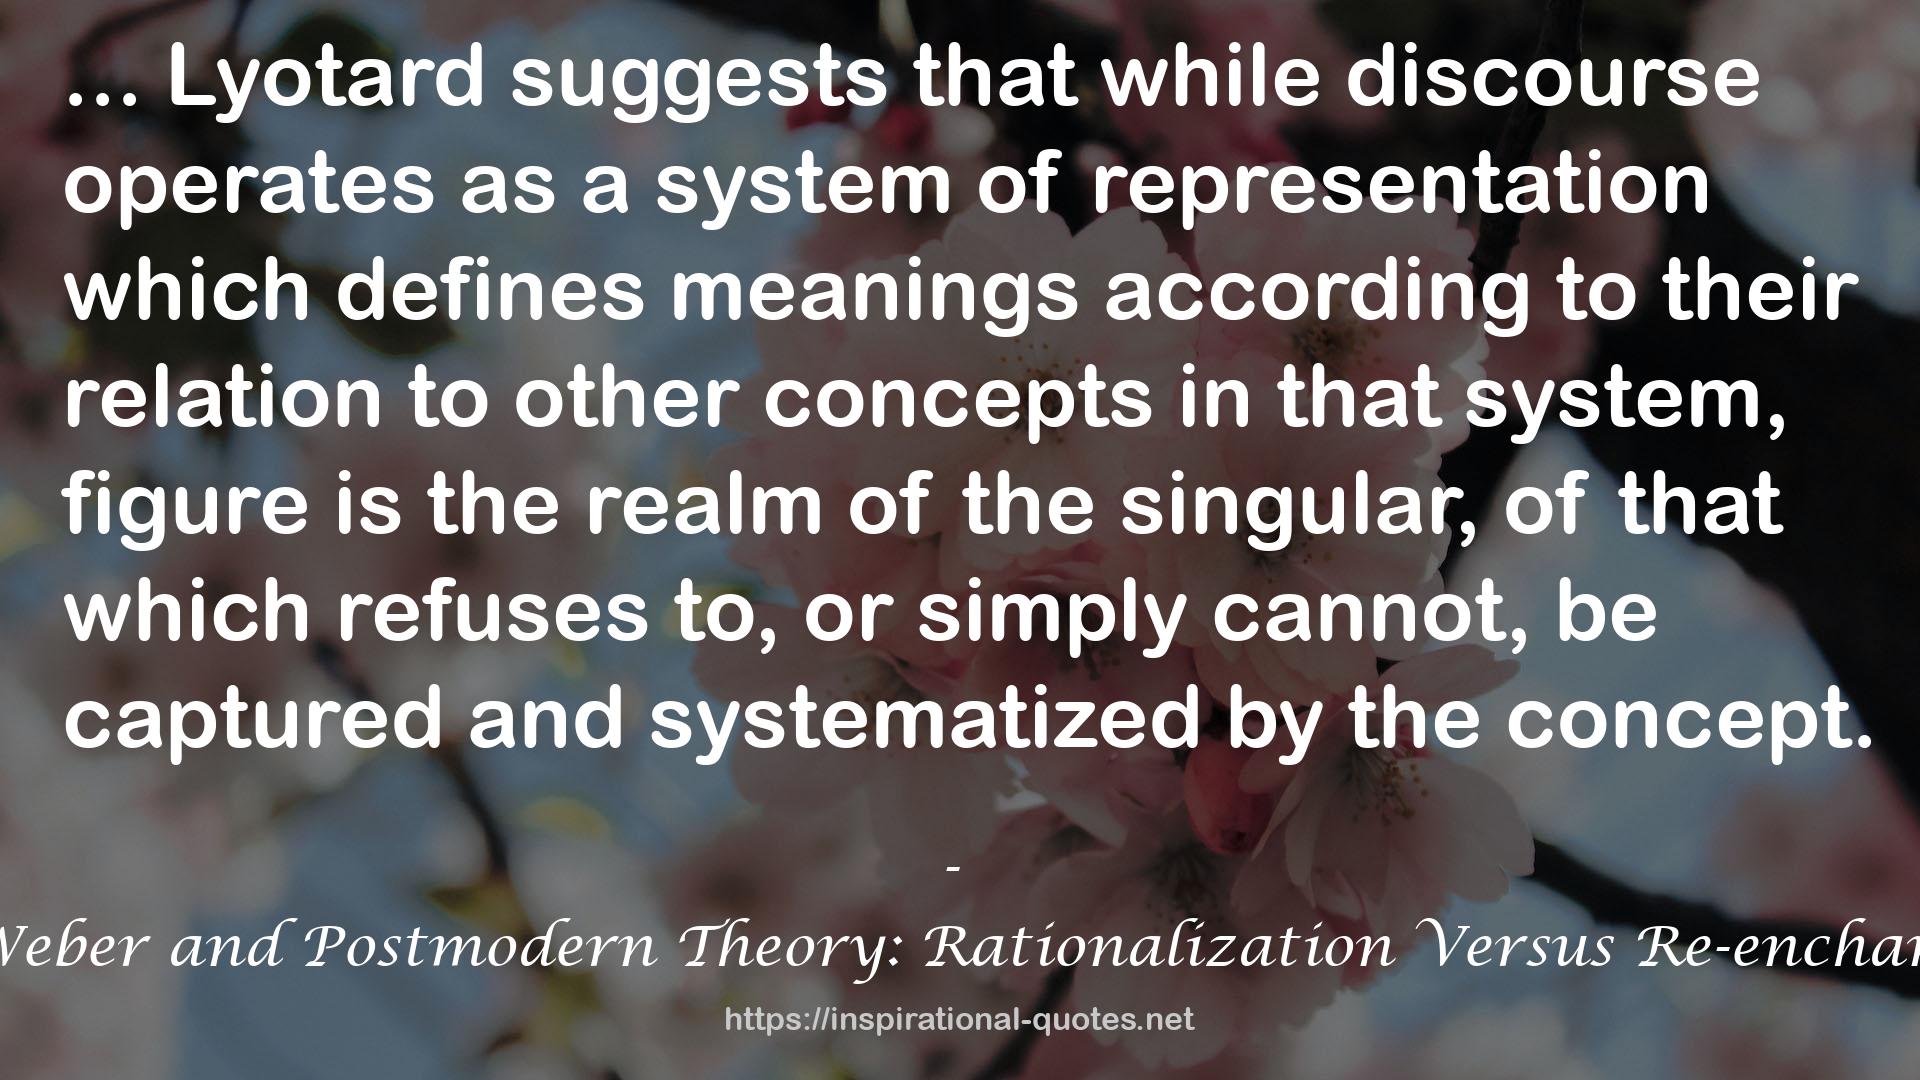 Max Weber and Postmodern Theory: Rationalization Versus Re-enchantment QUOTES